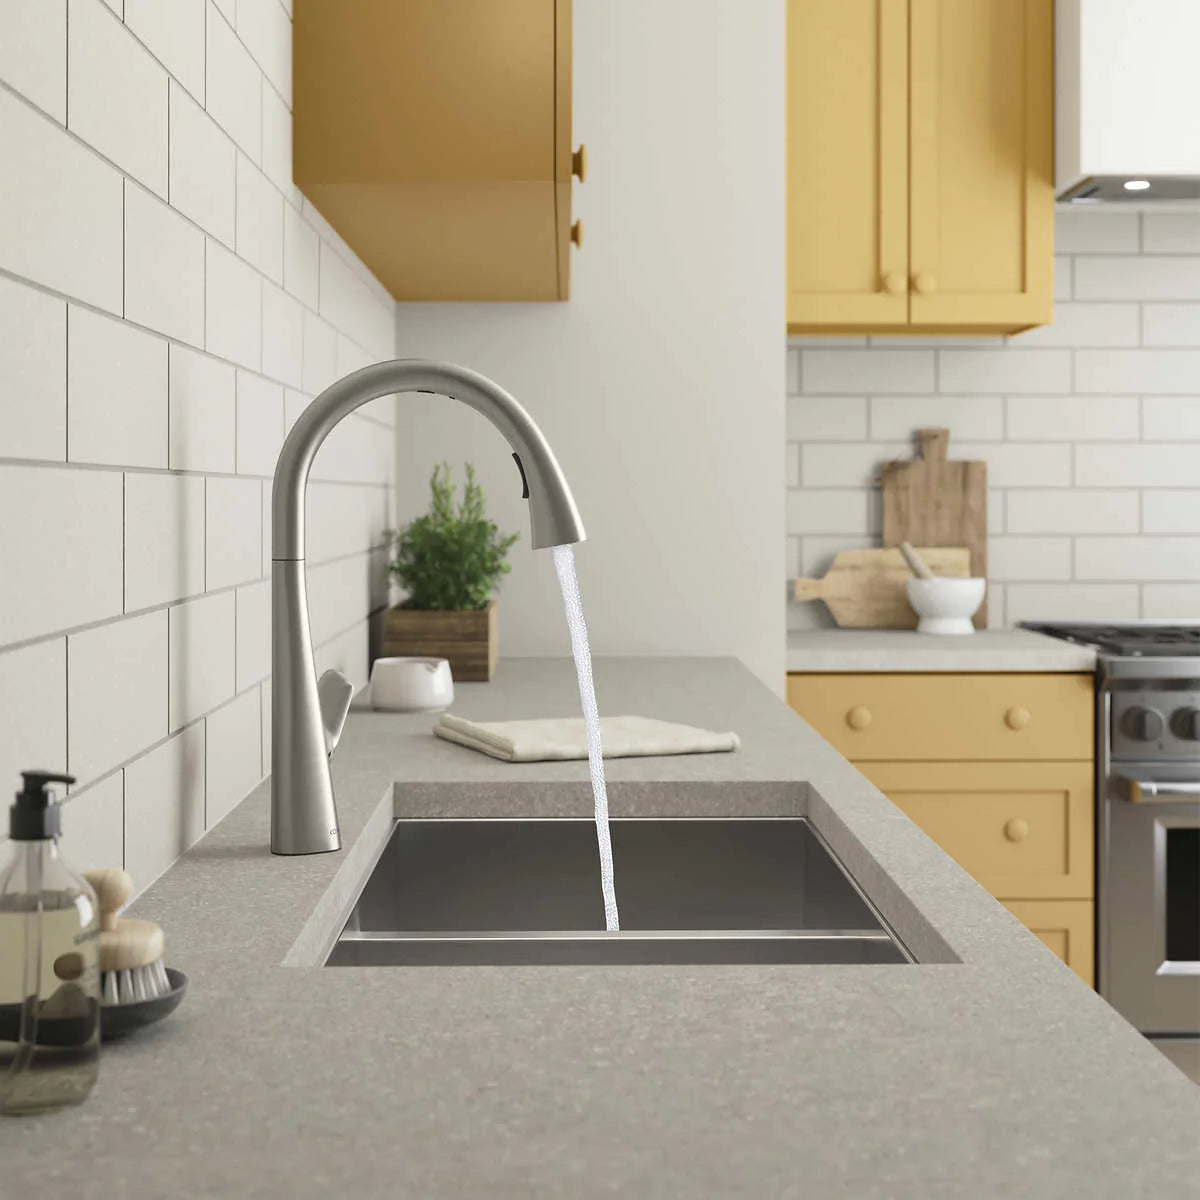 Kohler-robinet-cuisine-sans-contact-anessia-touchless-pull-down-kitchen-faucet-2